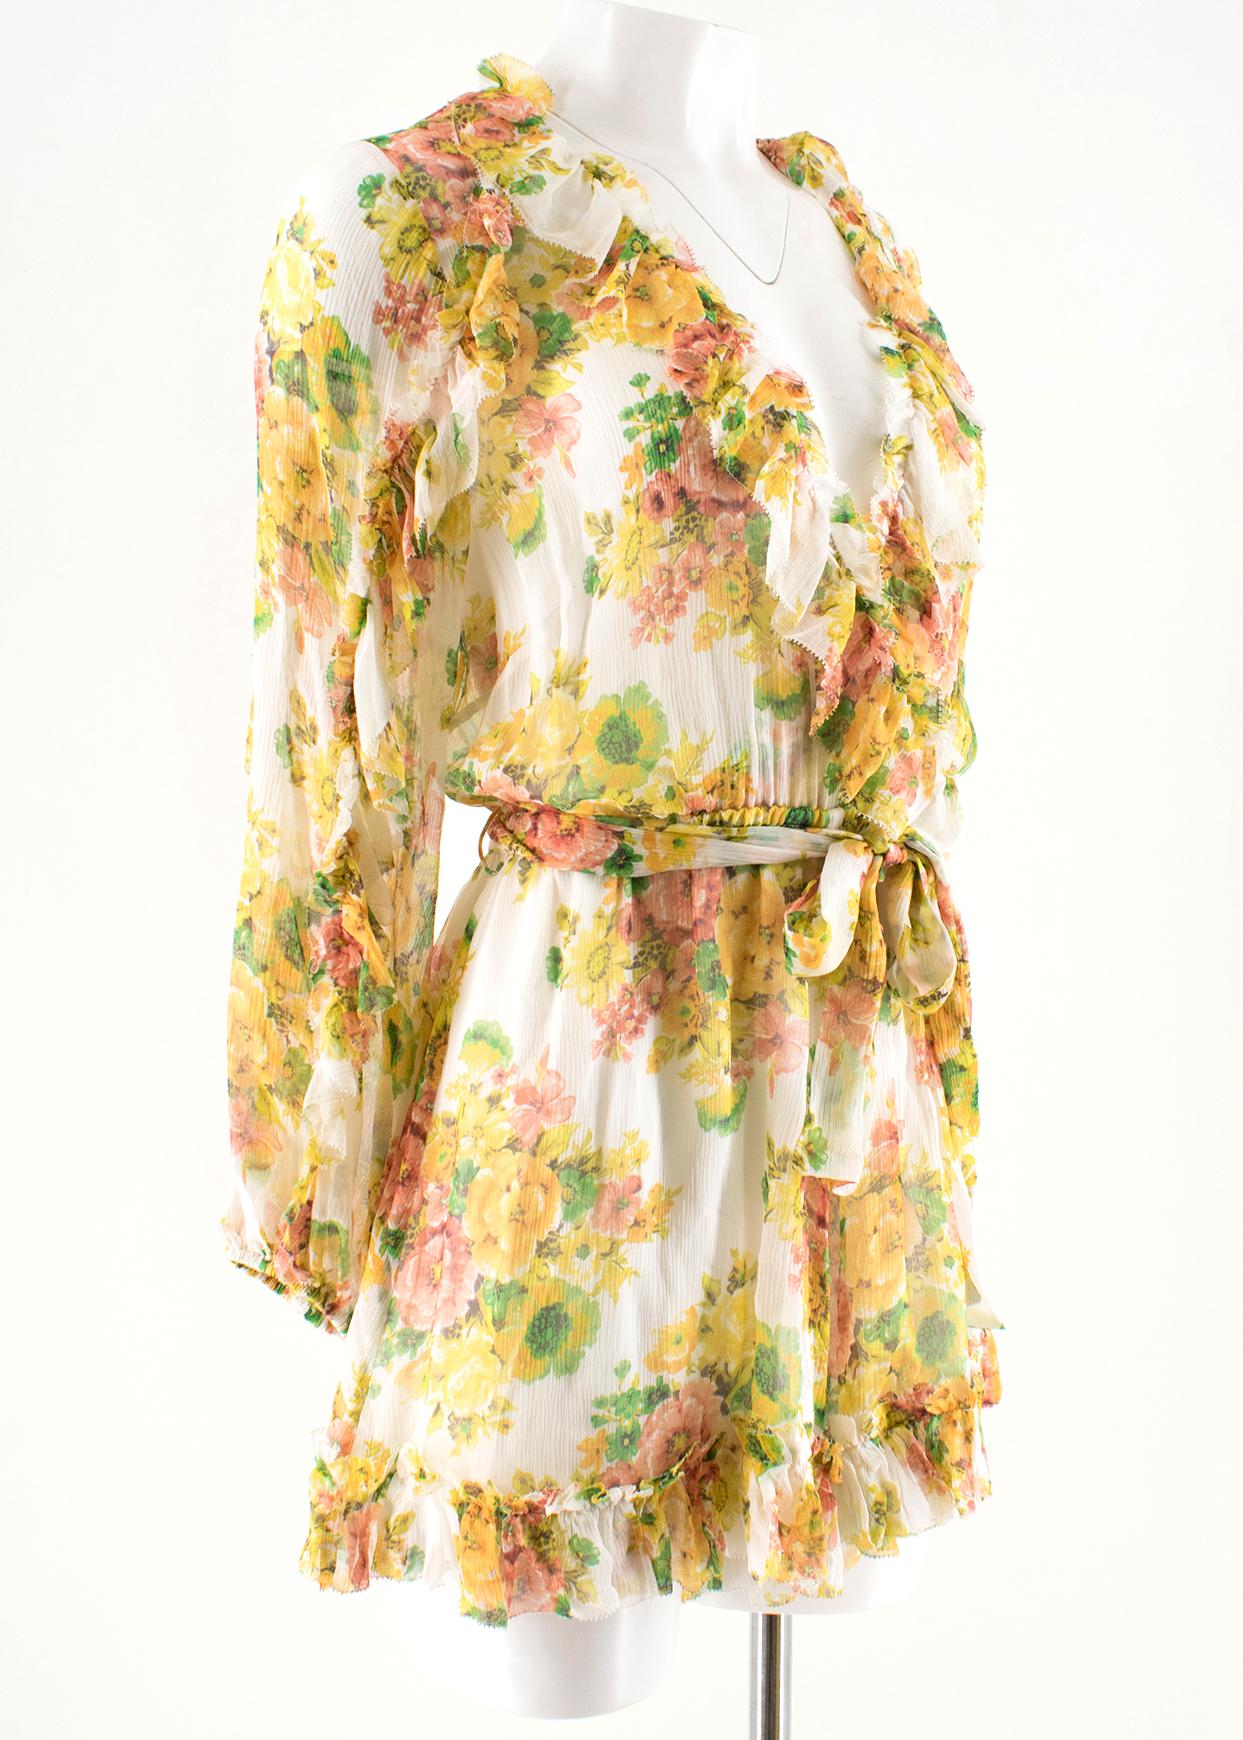 Zimmermann Floral-print Ruffled Silk Playsuit

- Multi-coloured silk playsuit
- Lightweight
- Floral print
- Plunging v-neck
- Long sleeved, elasticated cuffs
- Sheer top
- Ruffled detailing on the collar, sleeves and hem
- Elasticated waist
- Belt